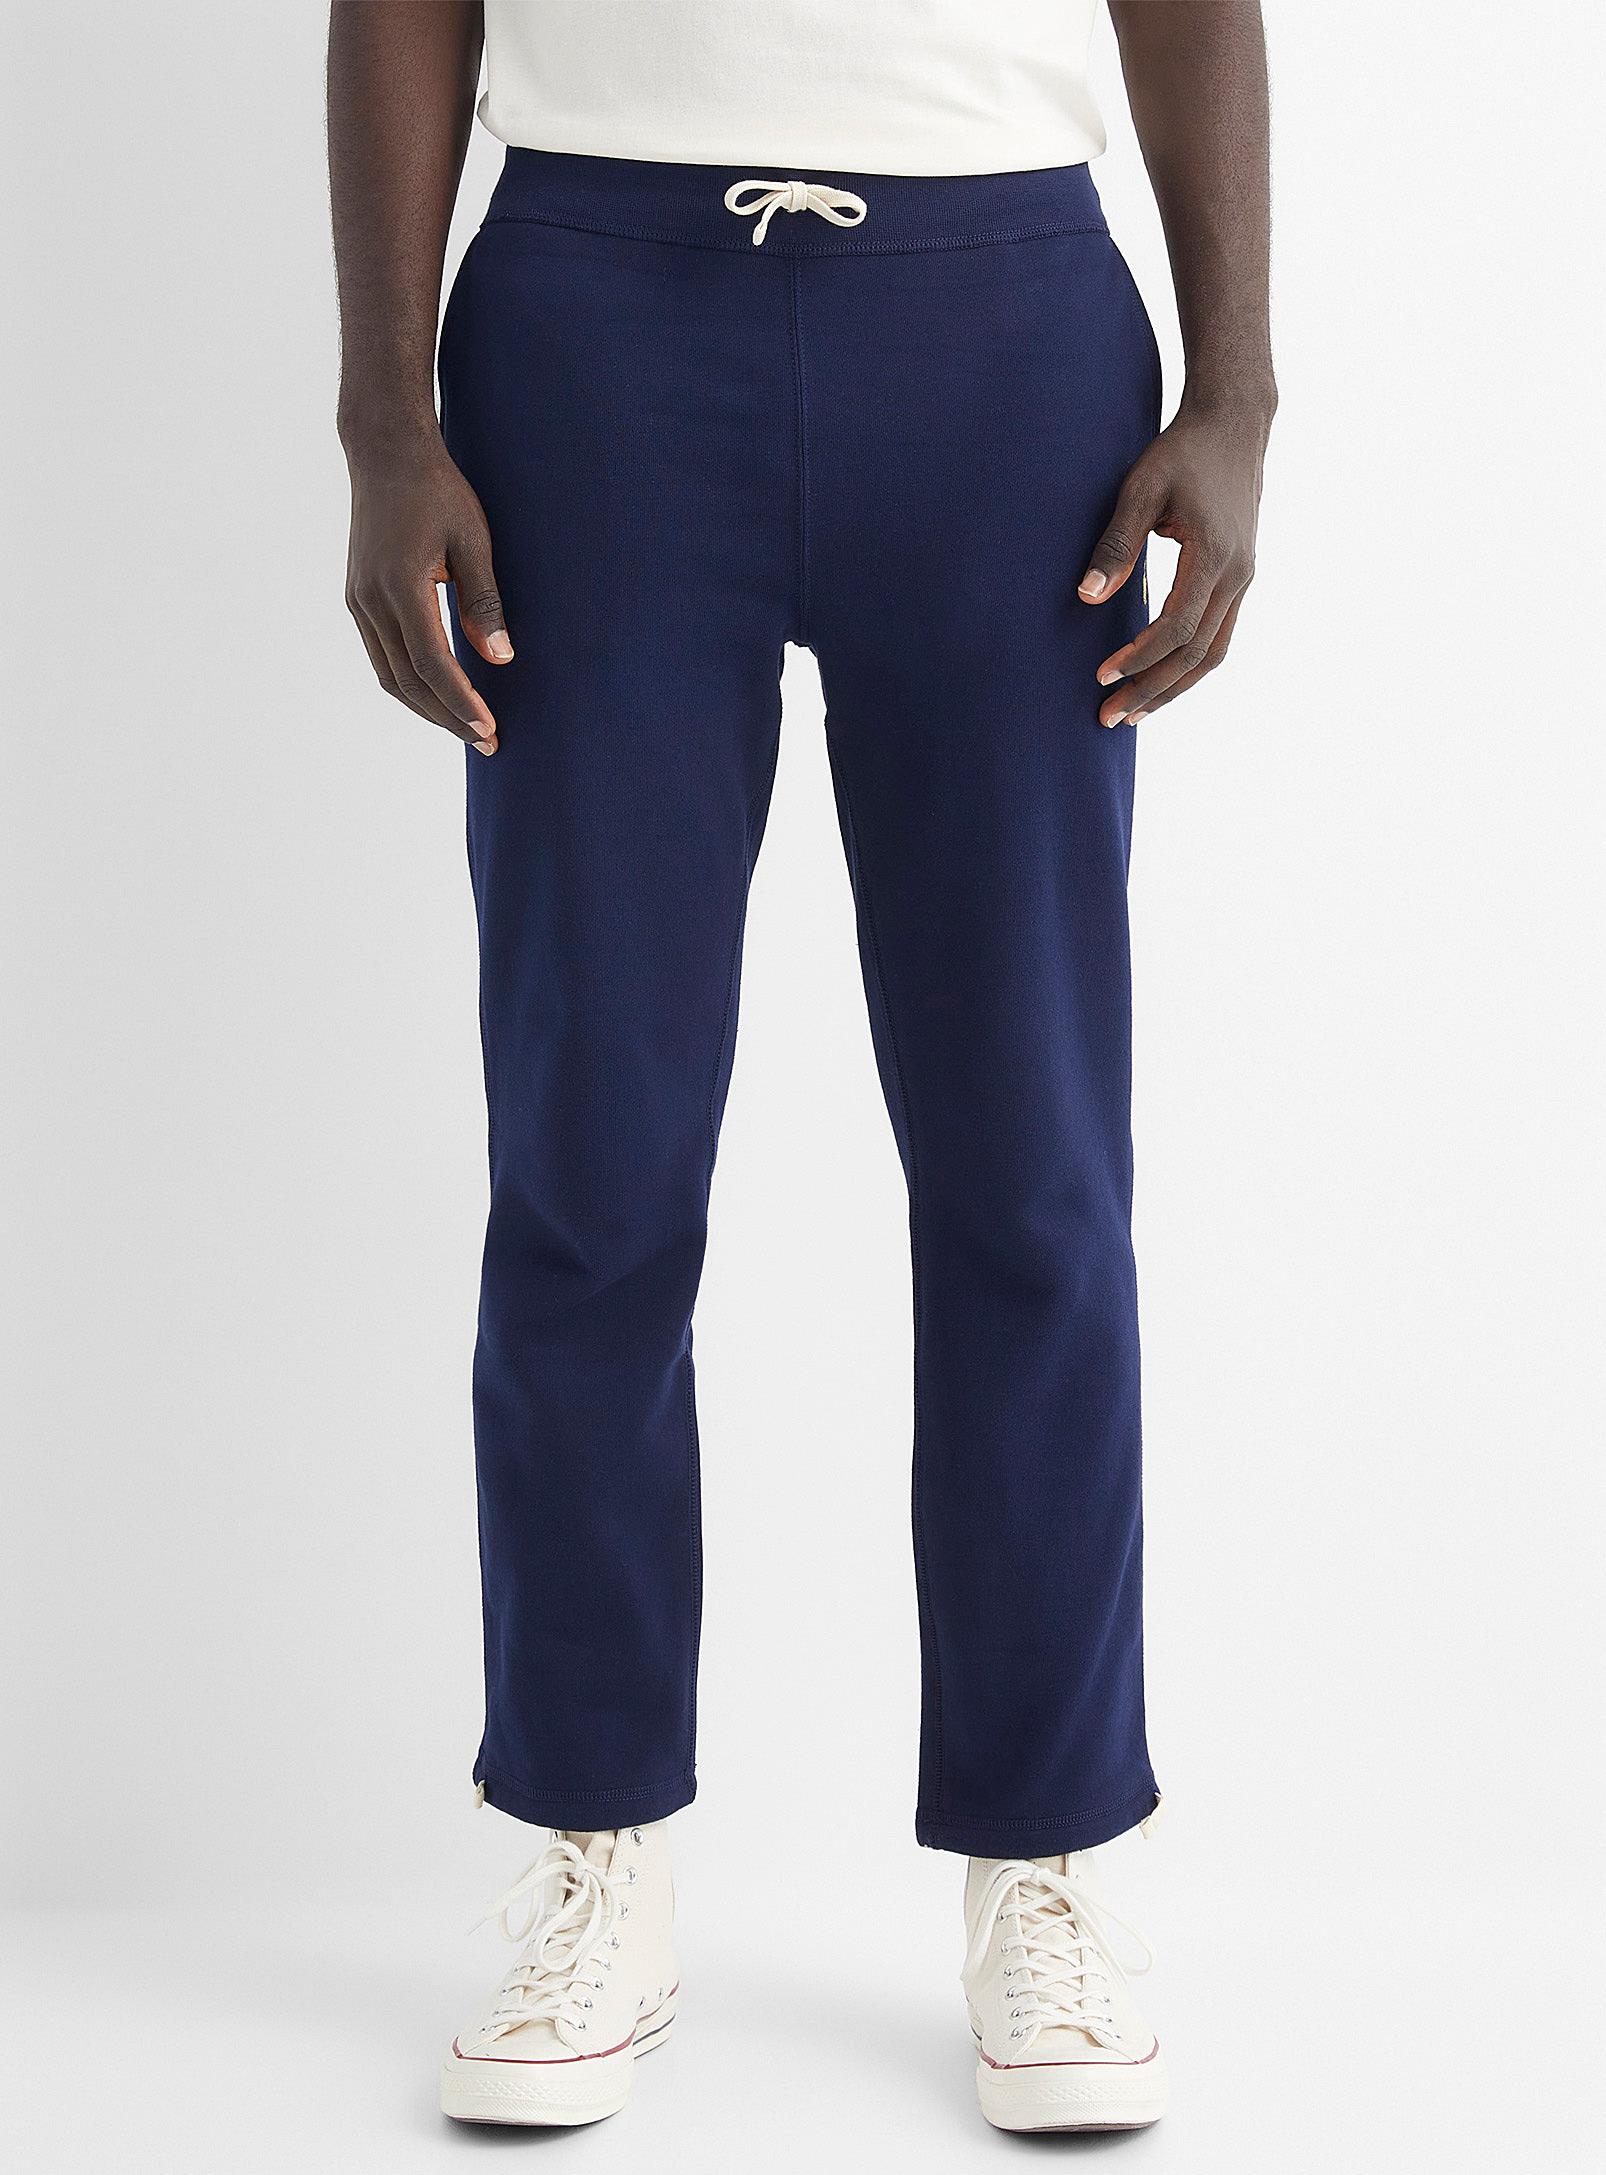 Polo Ralph Lauren Adjustable Ankle Minimalist joggers in Blue for Men